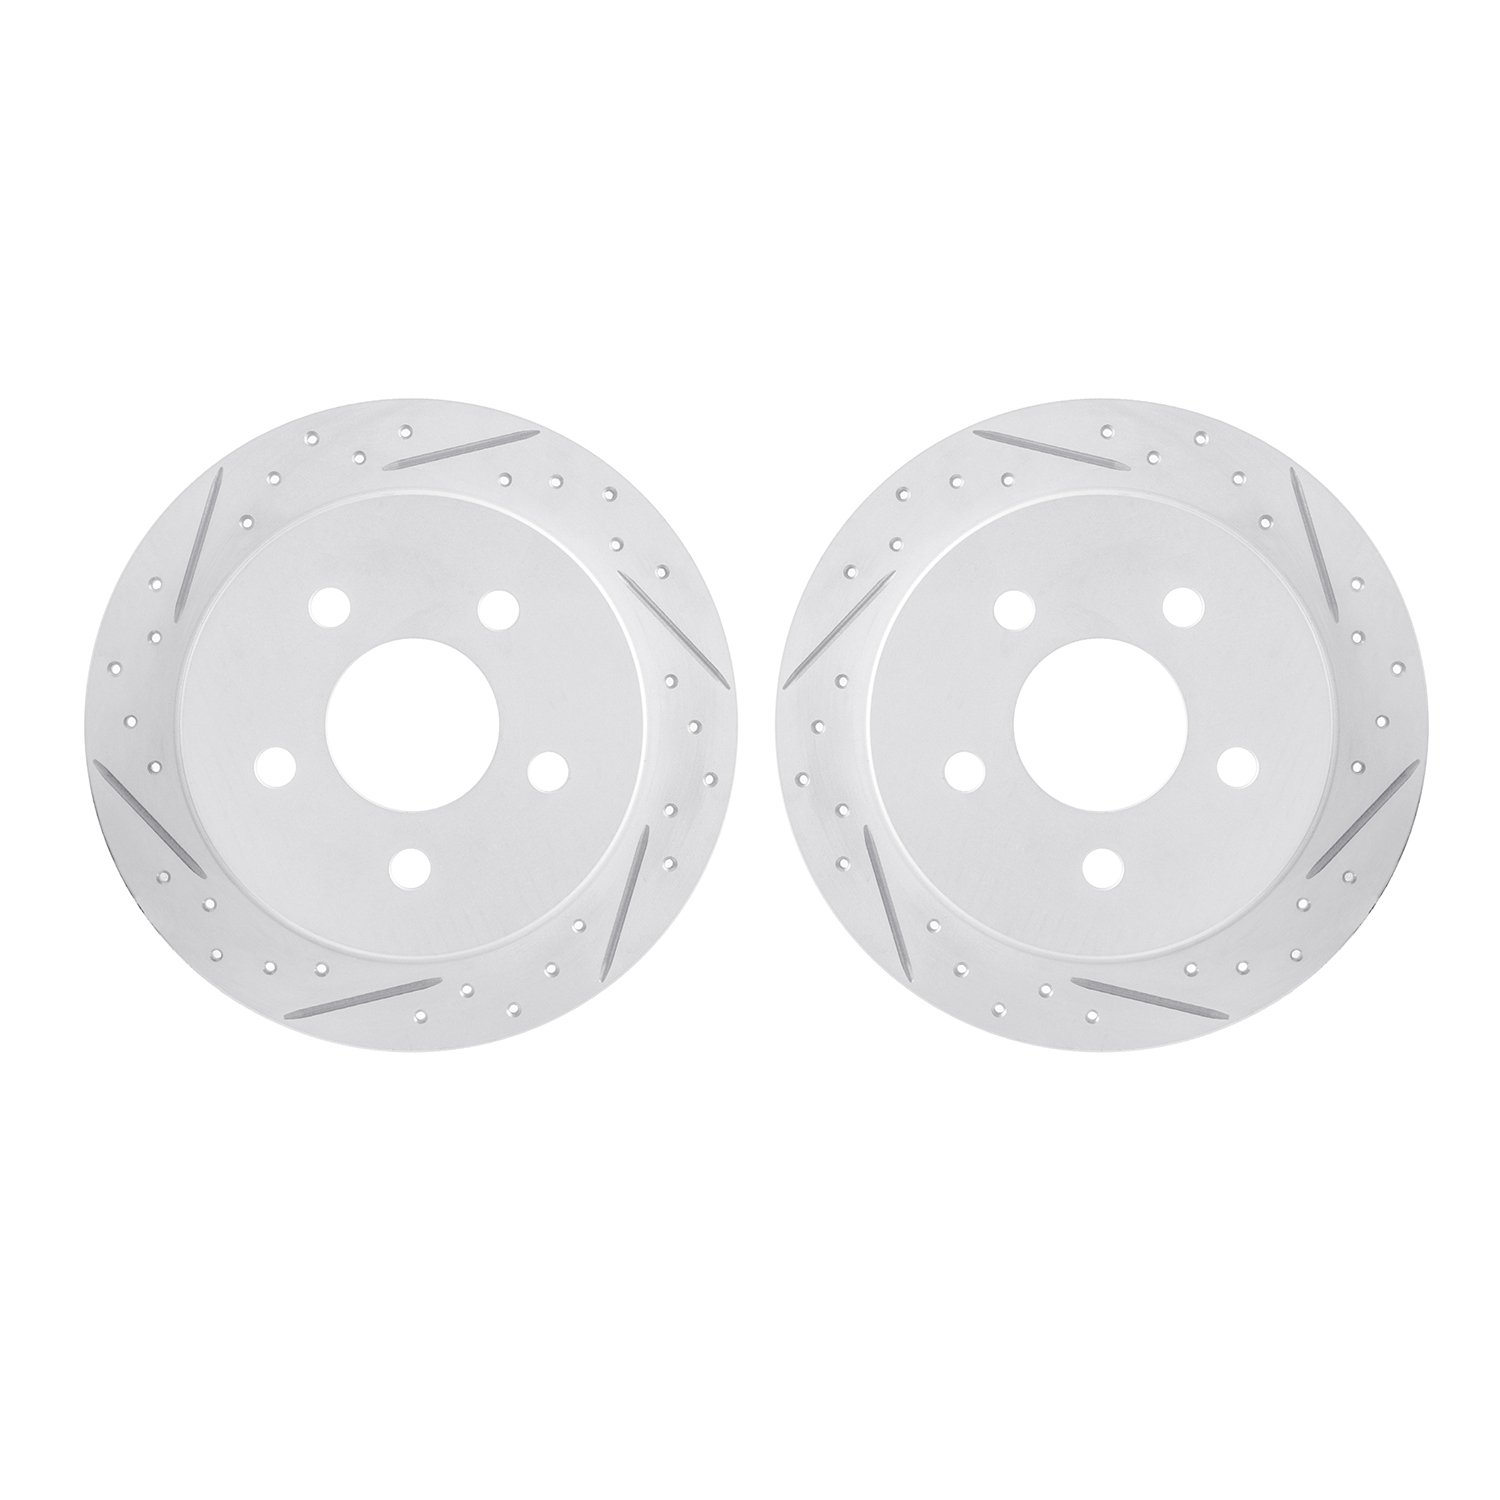 2002-52008 Geoperformance Drilled/Slotted Brake Rotors, 1997-2005 GM, Position: Rear